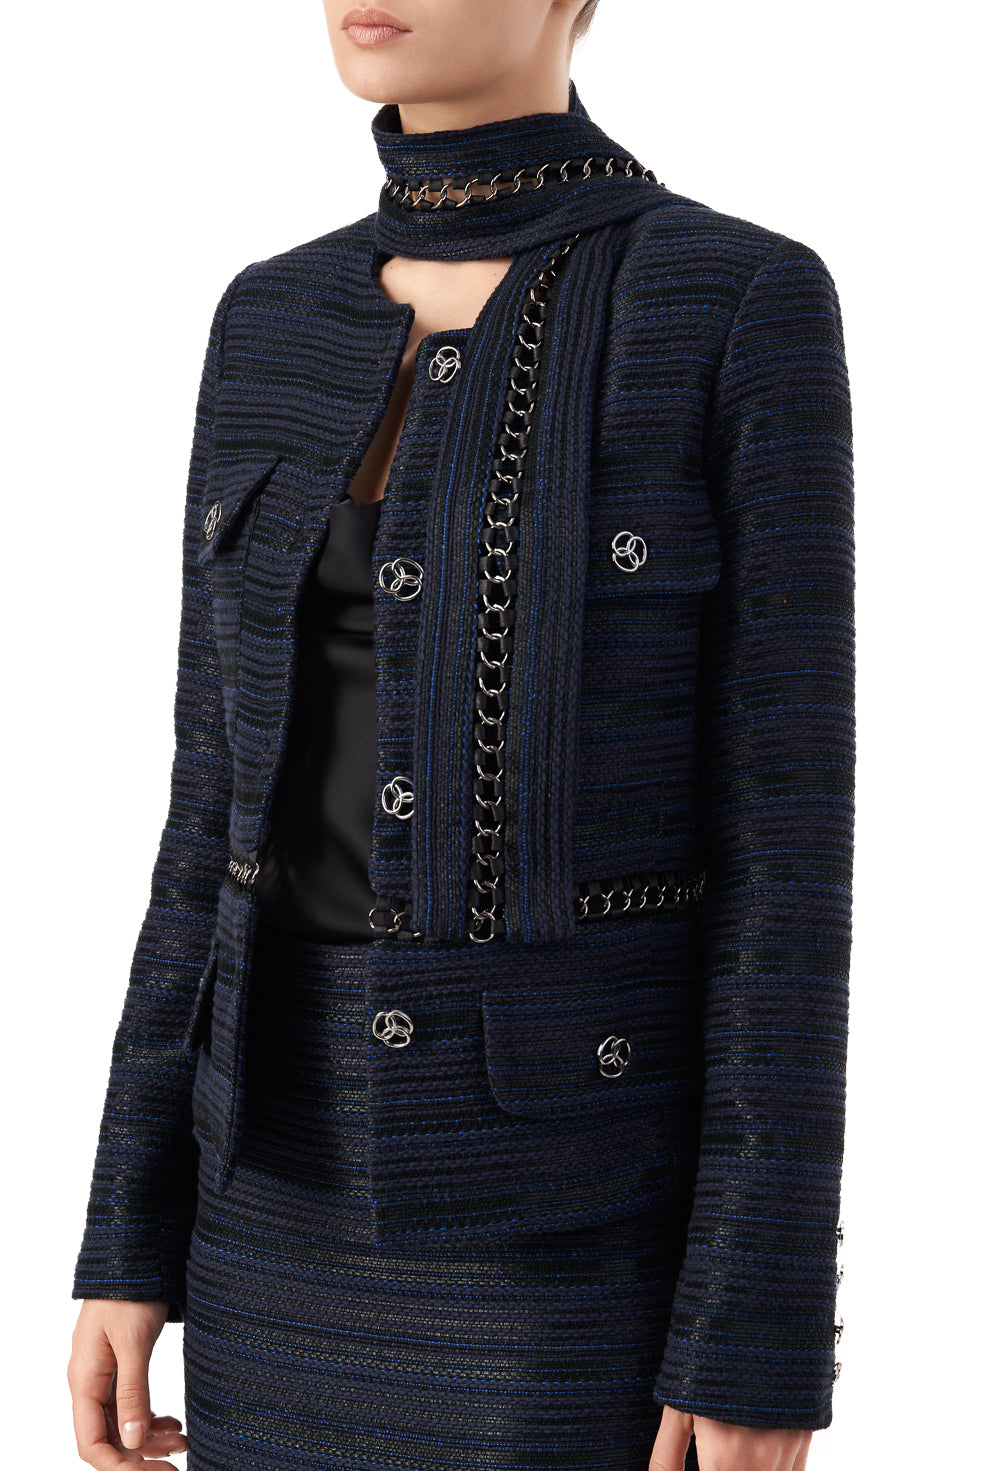 Gwen chain embroidered shawl detailed long sleeve blazer